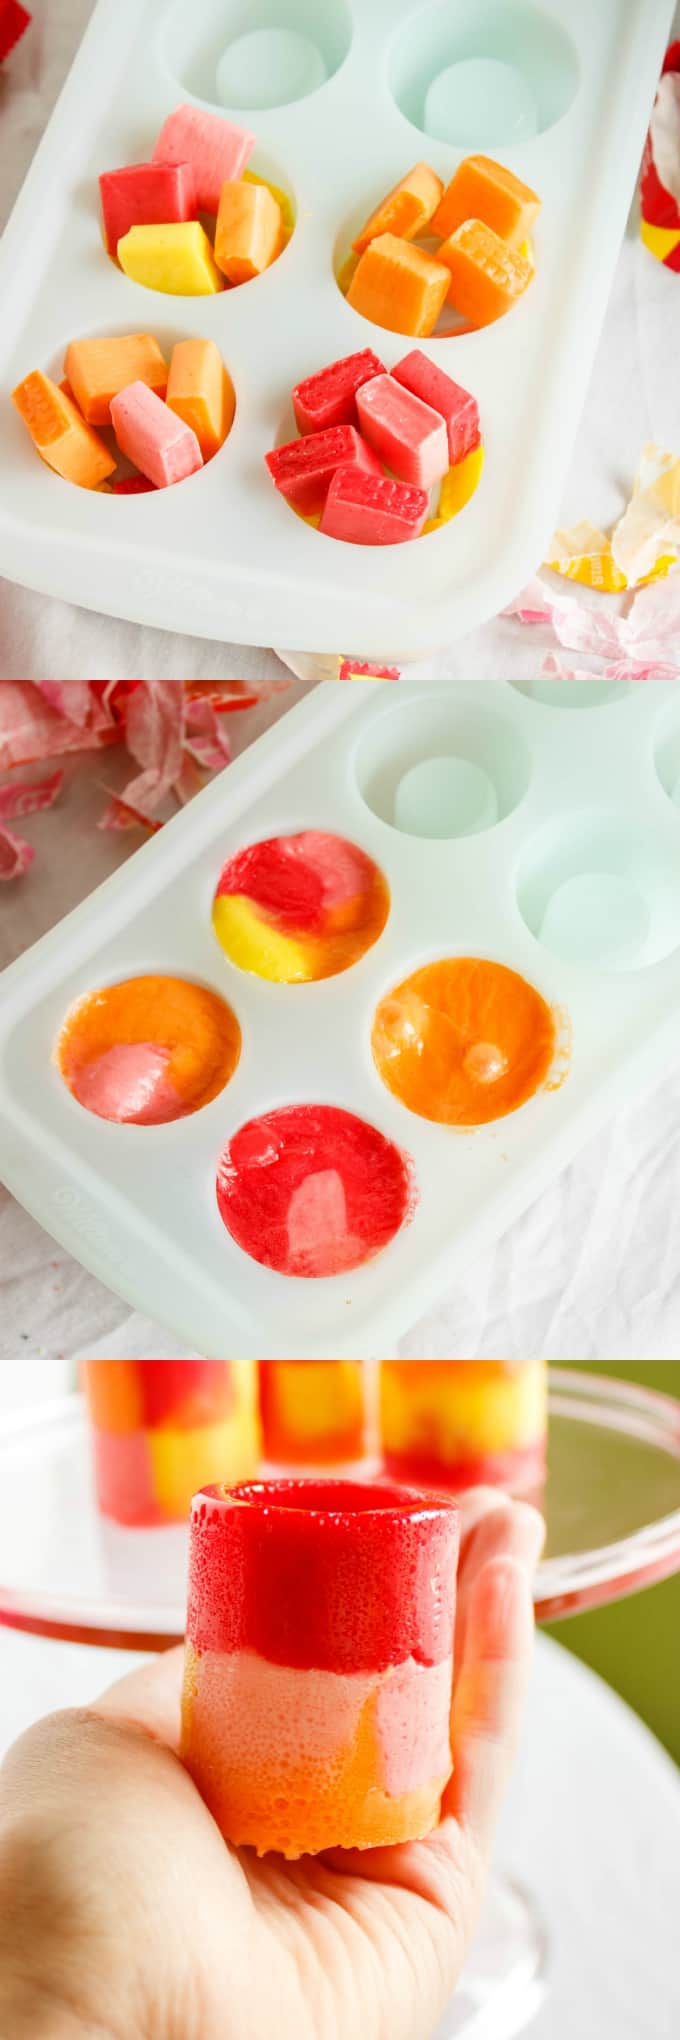 Starburst Candy  before and after melting into mold, shot glasses on glass tray and one hold by hand